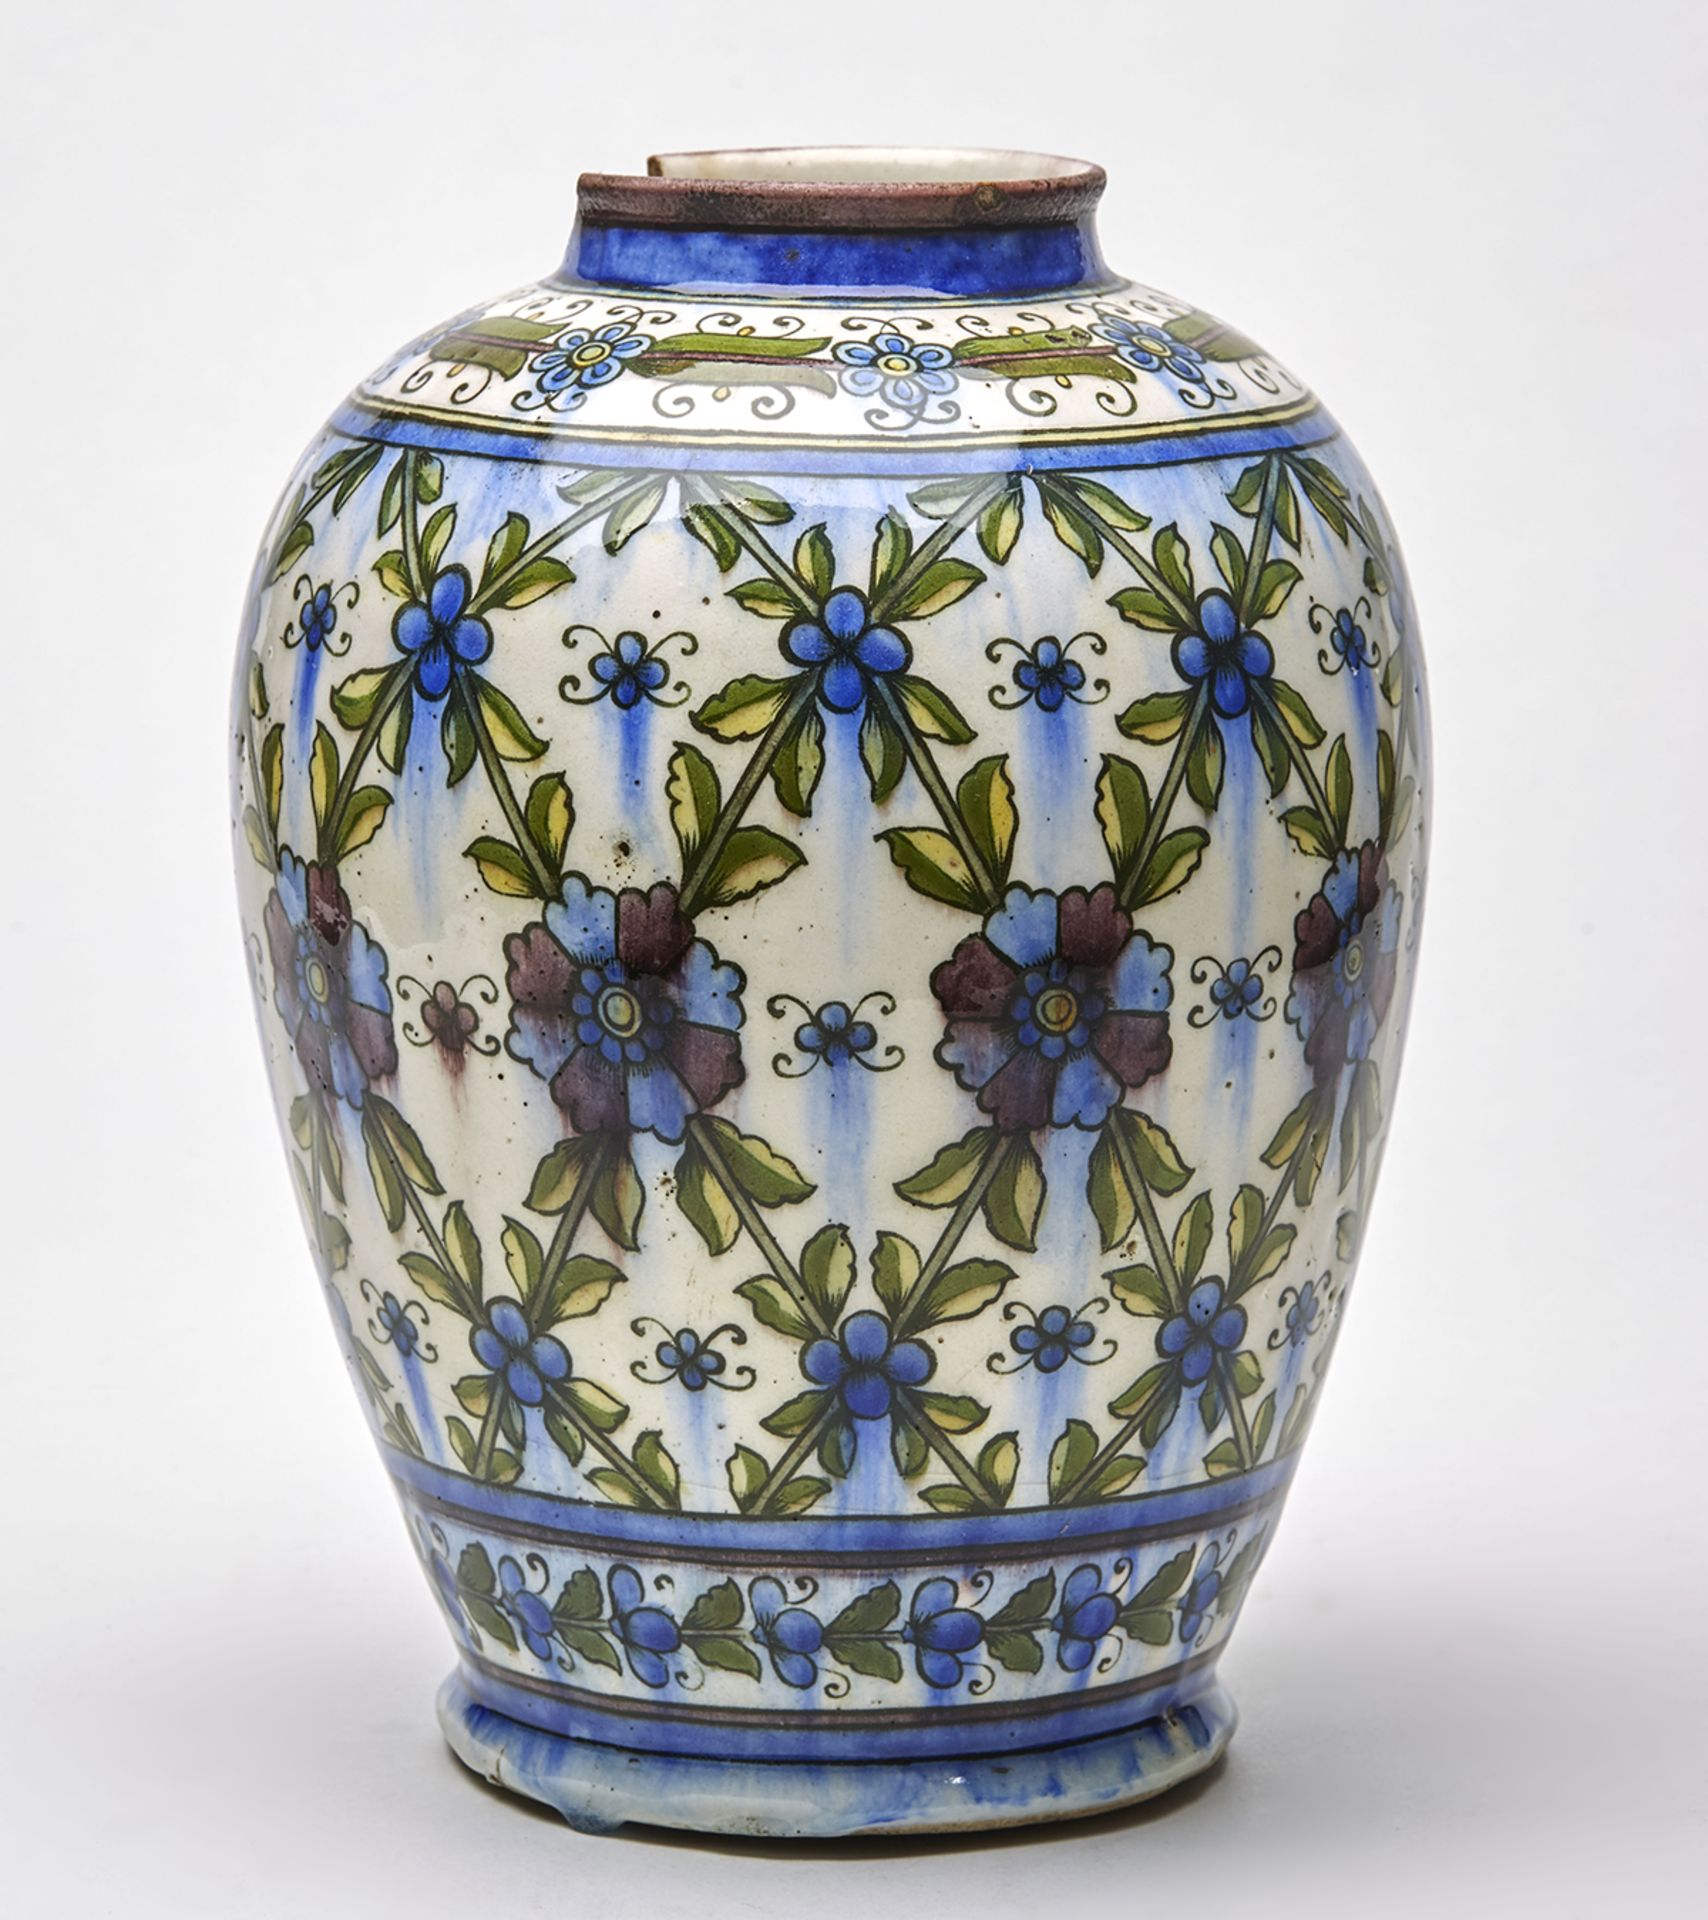 ANTIQUE PERSIAN FLORAL PAINTED BALUSTER FORM VASE, 19TH C.   DIMENSIONS   Height 28cm, Diameter 19,